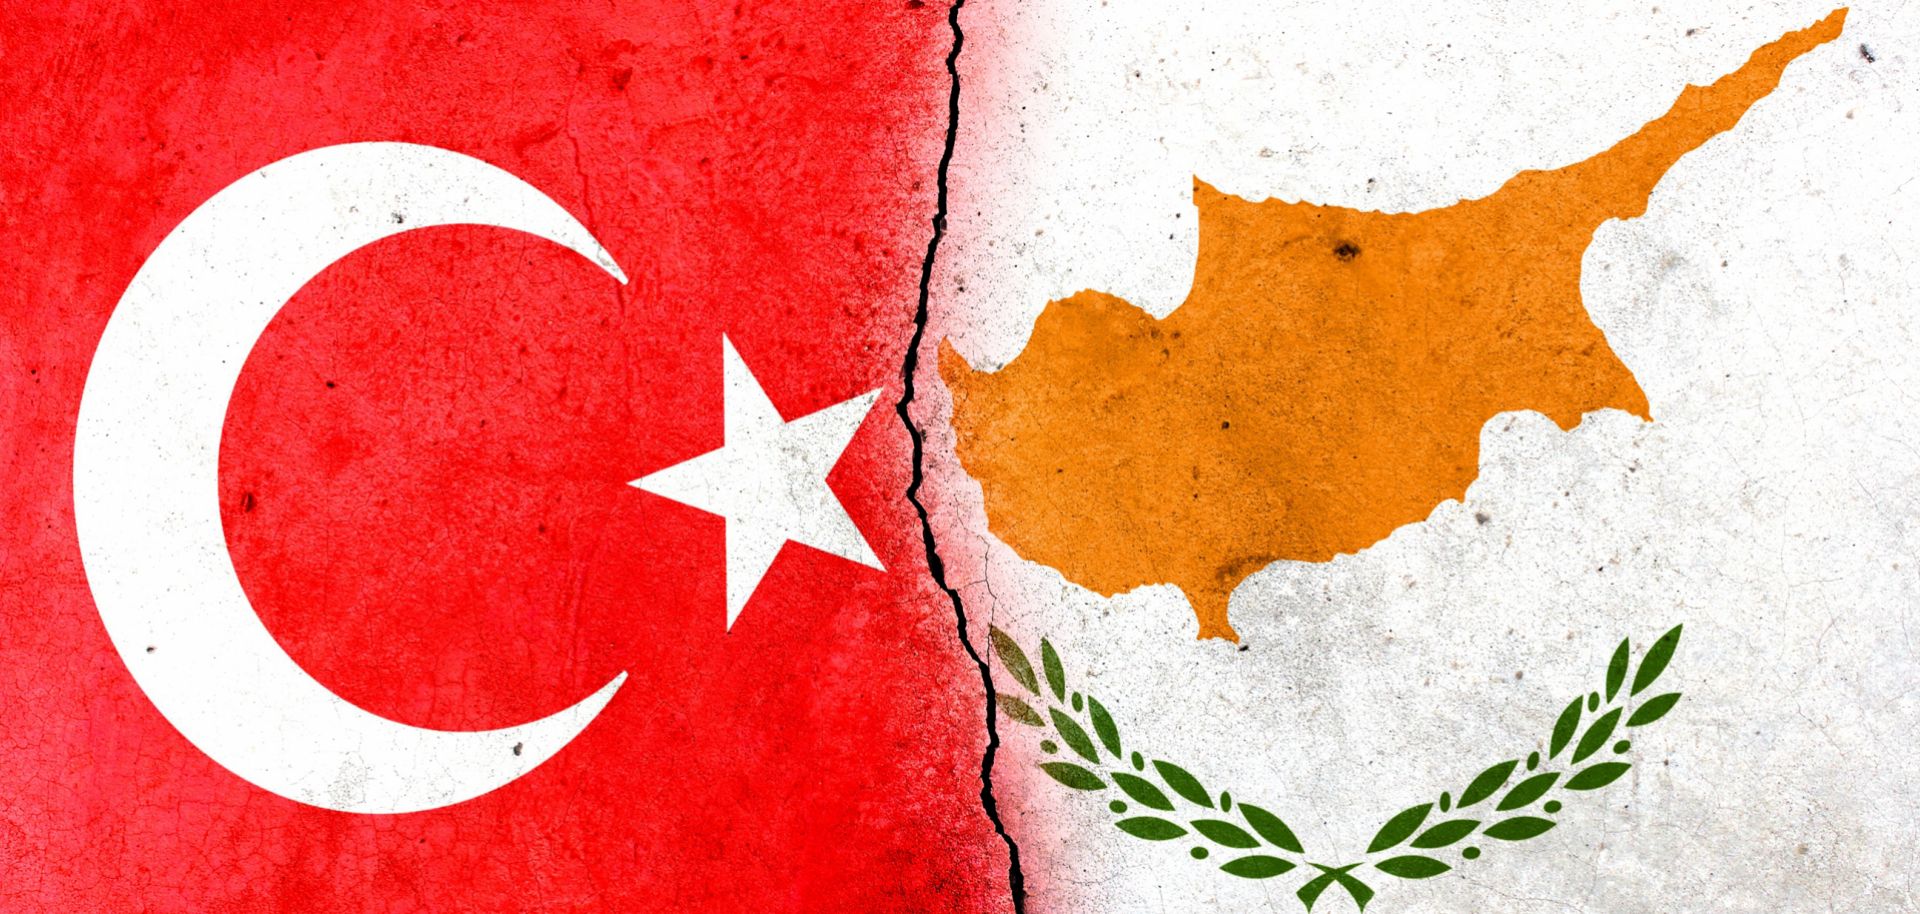 The flags of the Turkish Republic of Northern Cyprus (L) and the Republic of Cyprus (R) are divided by a crack.